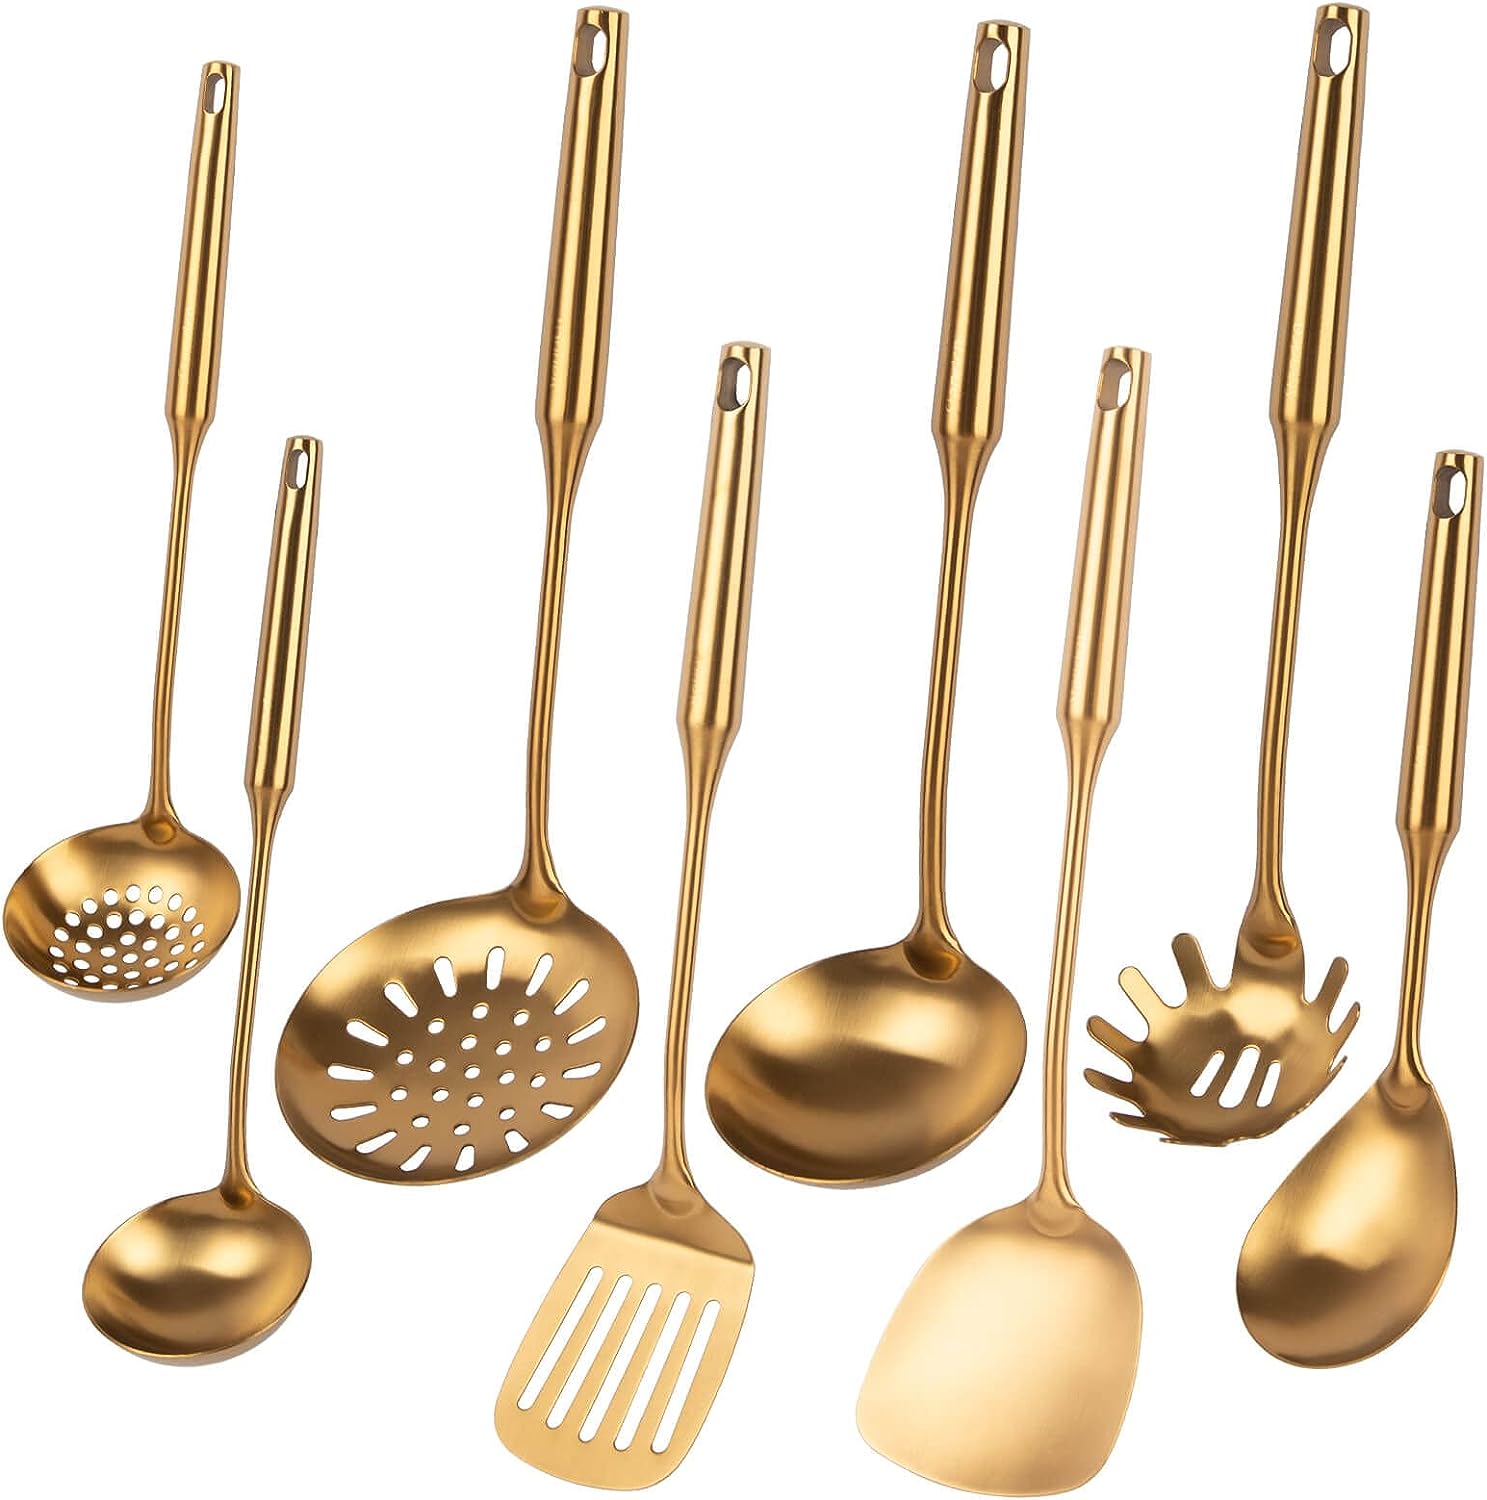 Gold kitchen collection